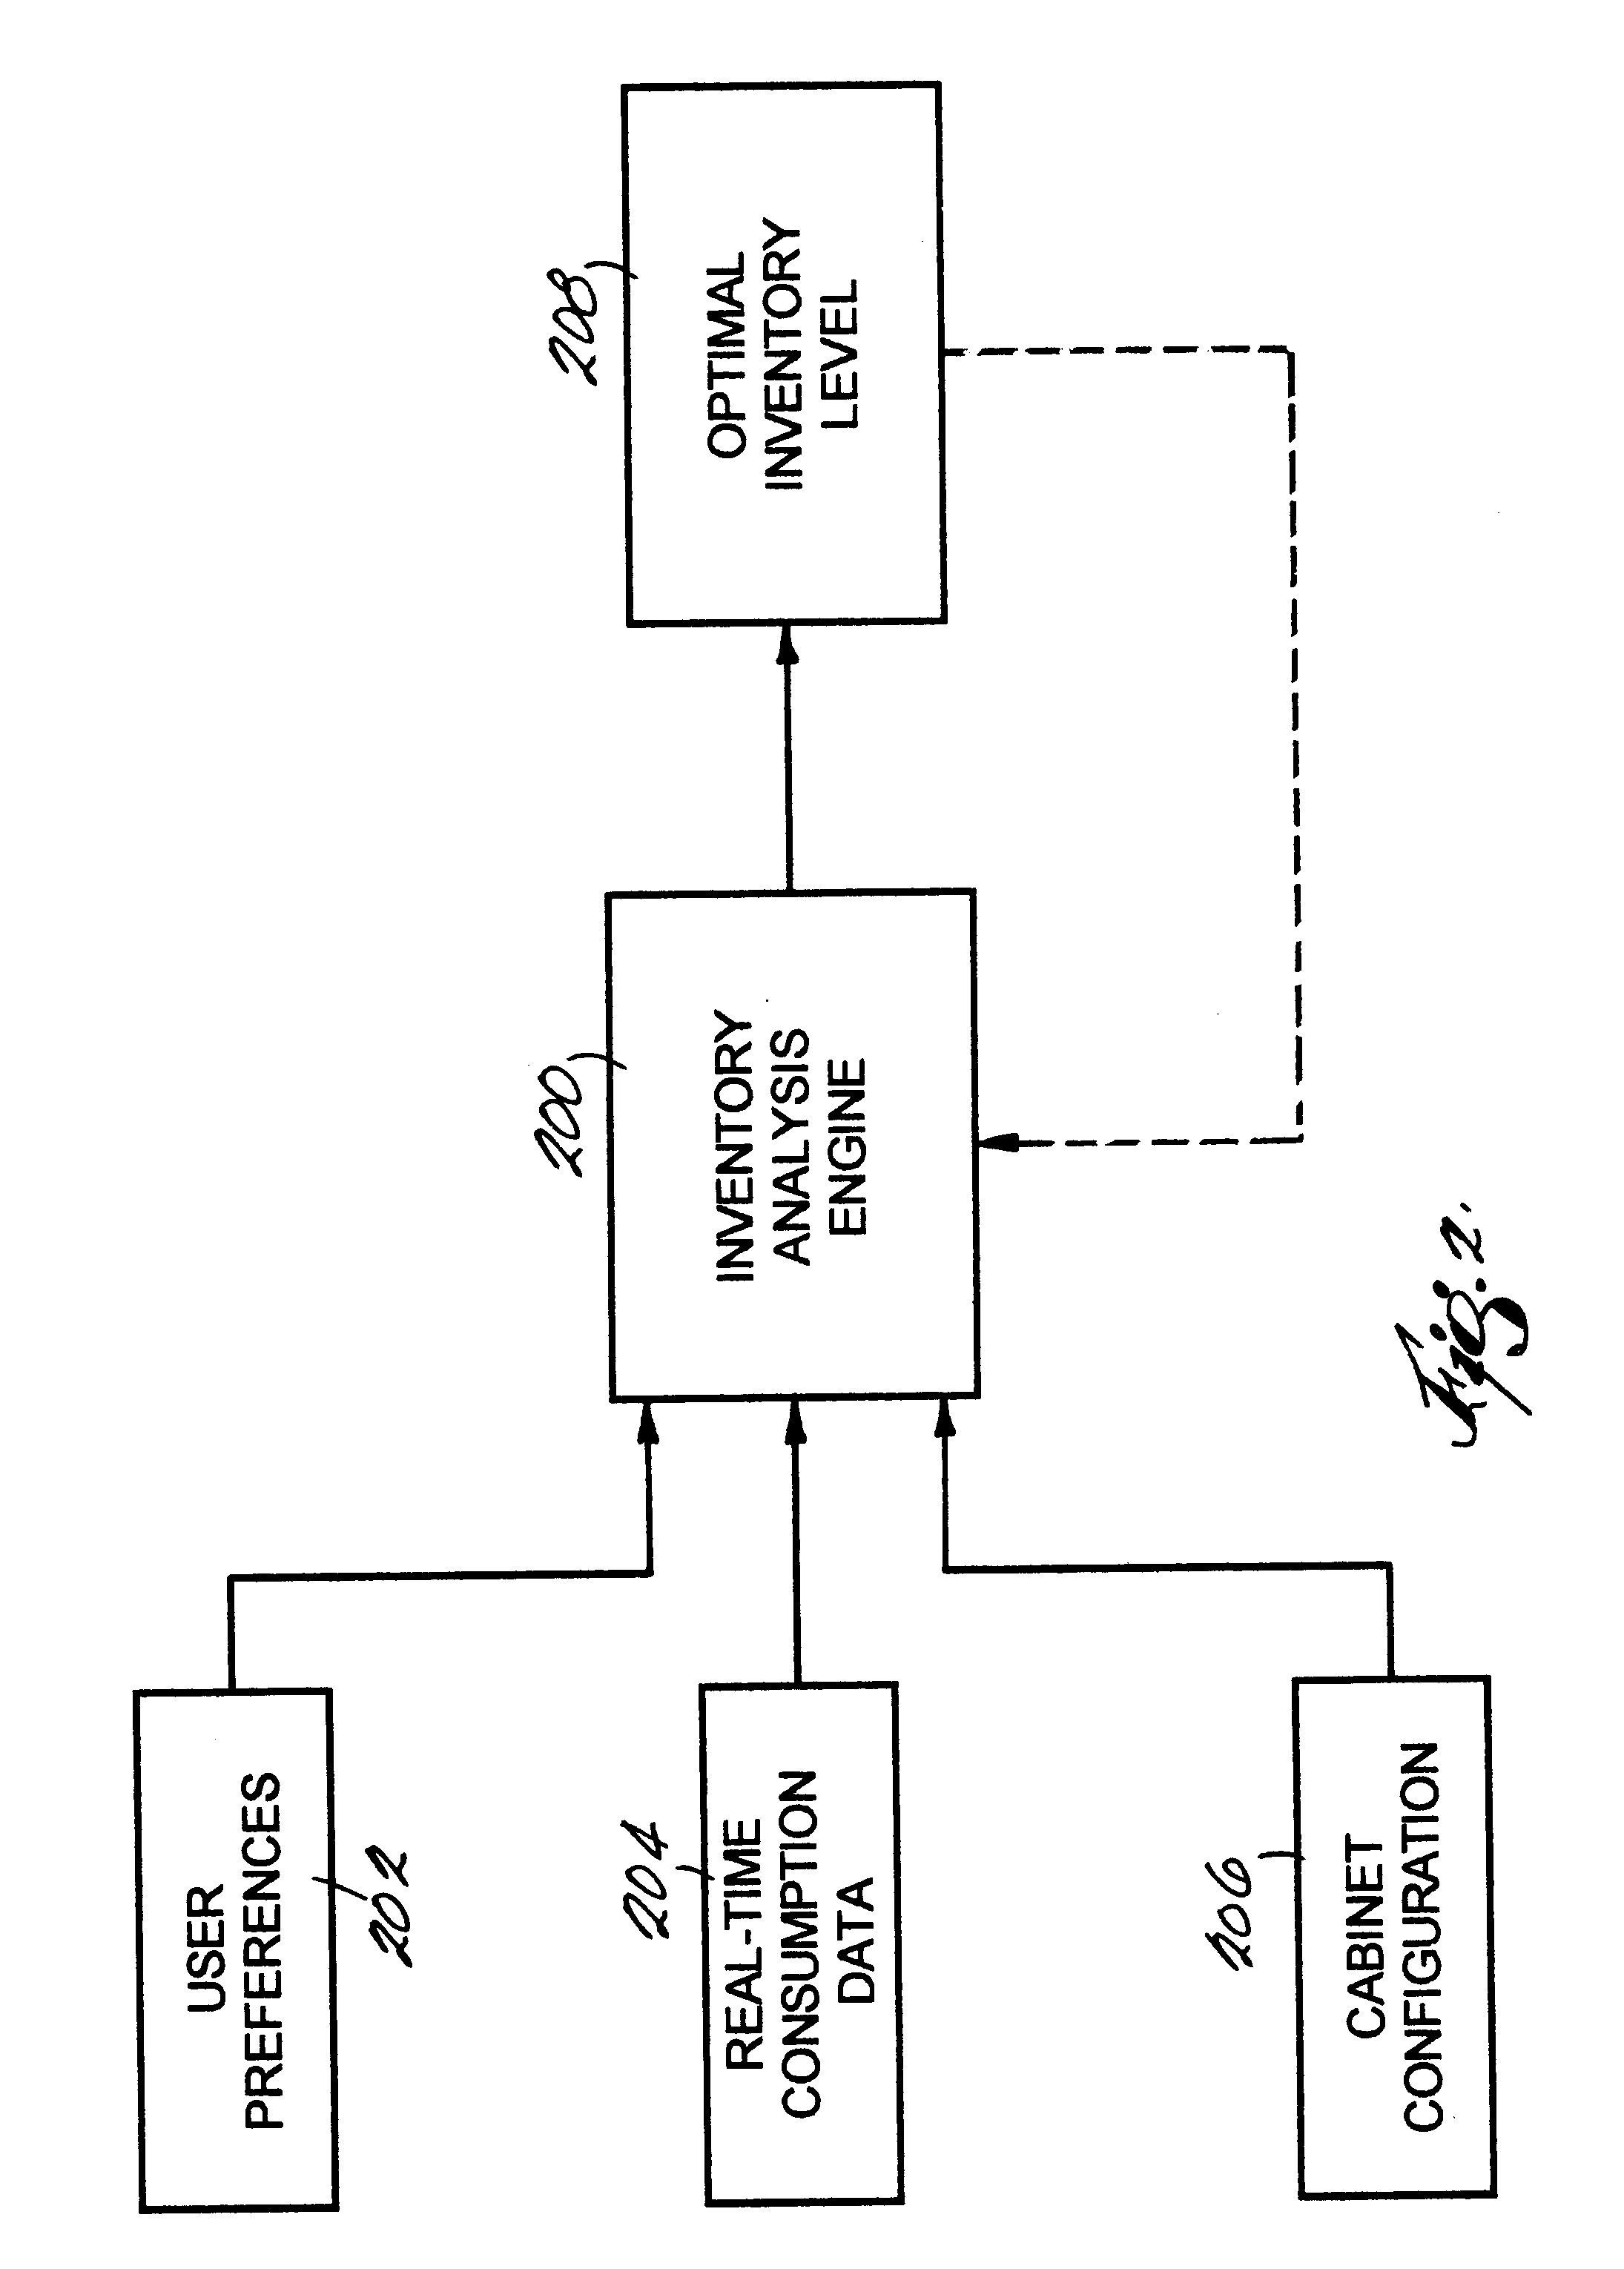 Inventory management system and method